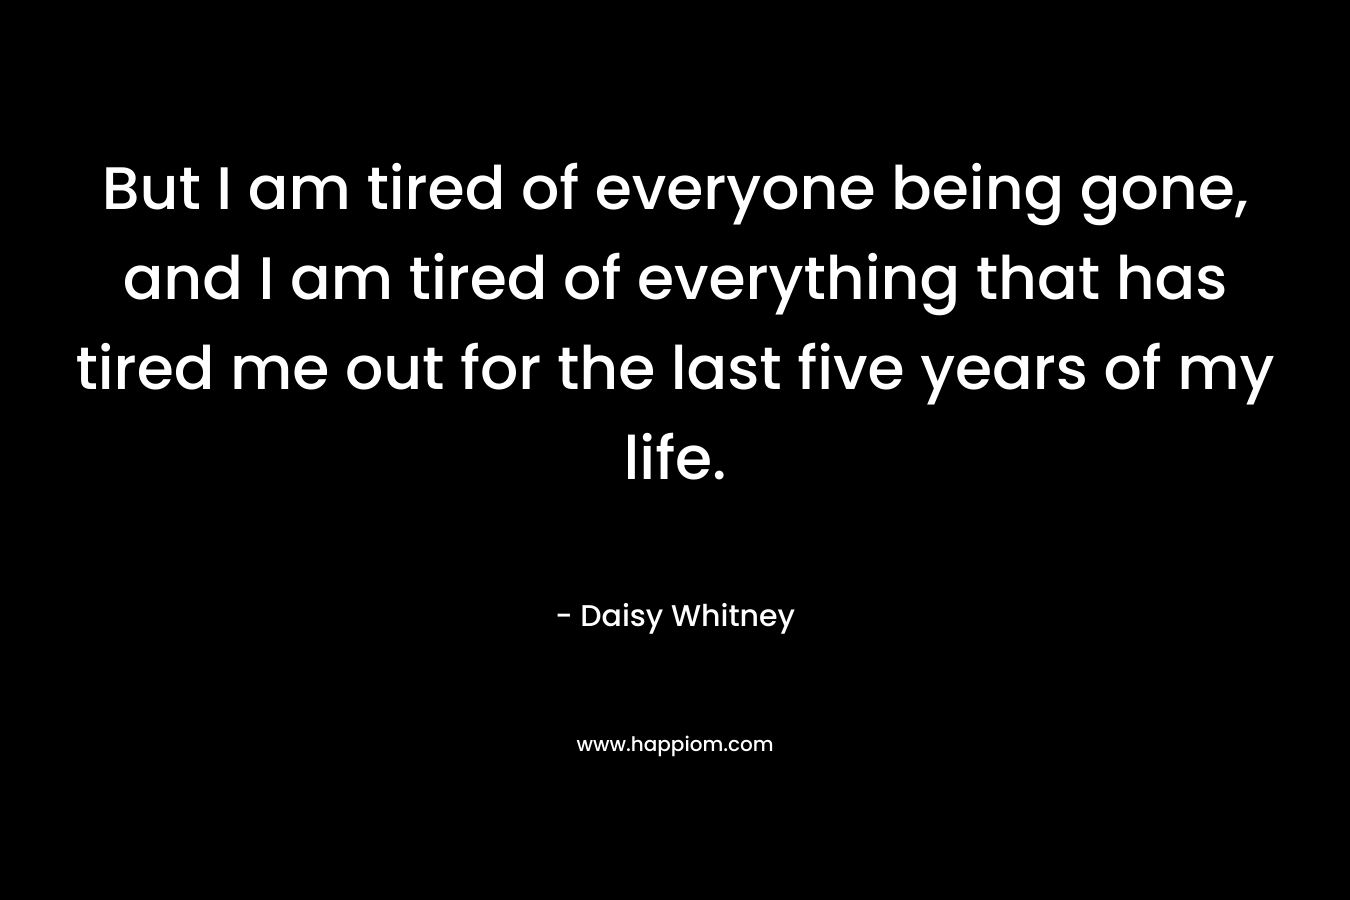 But I am tired of everyone being gone, and I am tired of everything that has tired me out for the last five years of my life. – Daisy Whitney